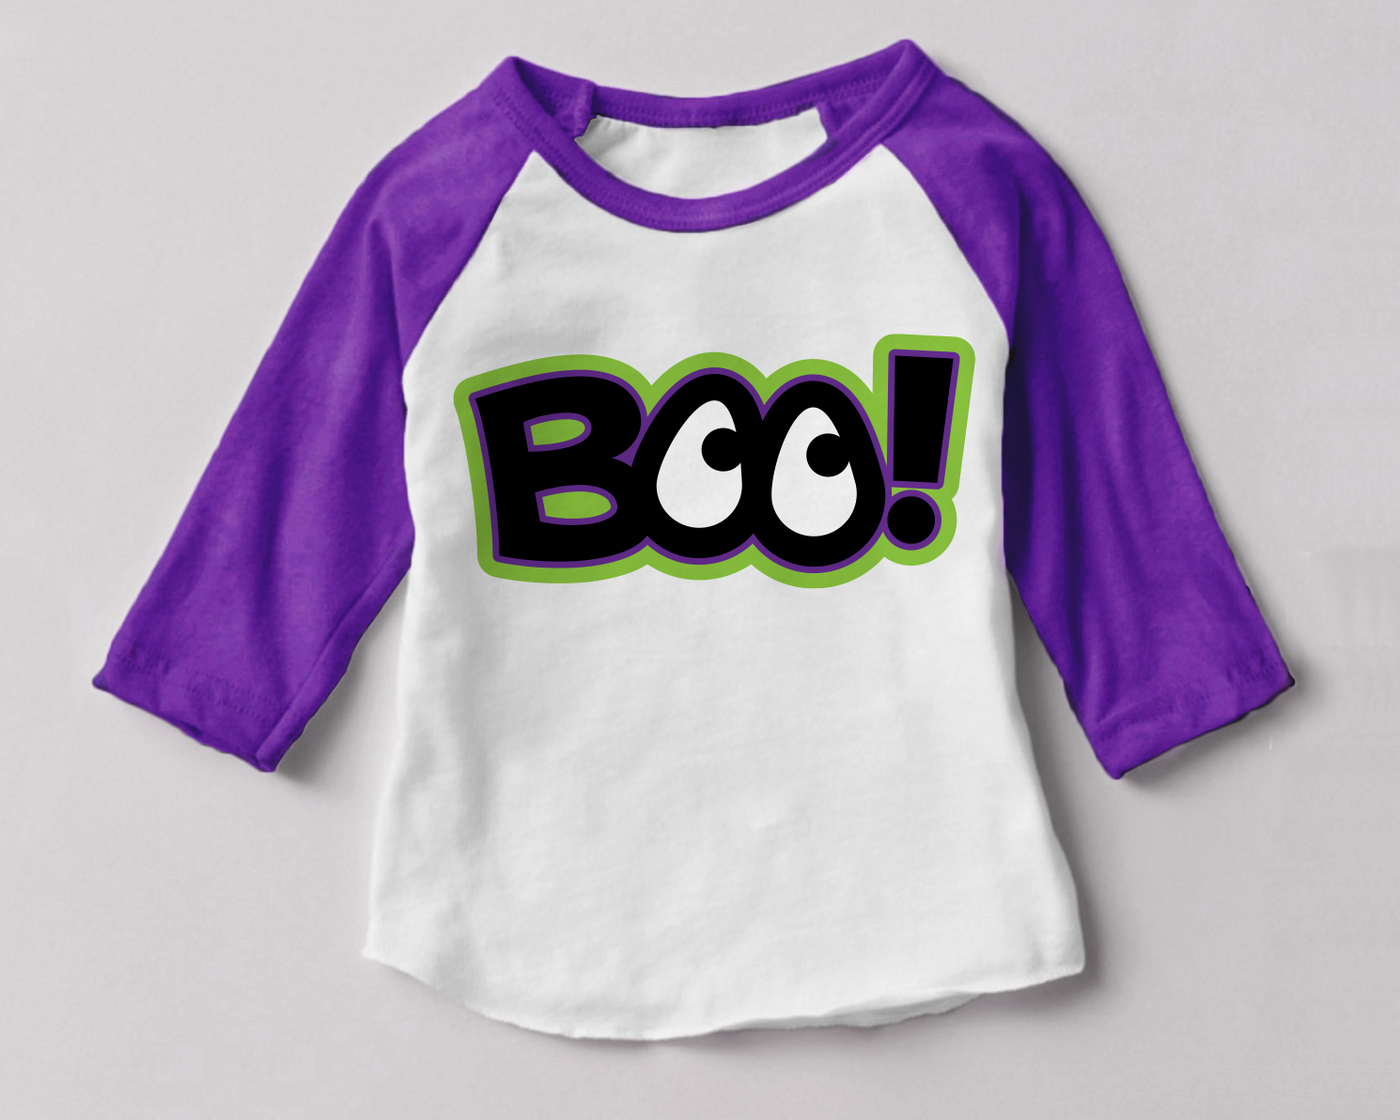 A purple and white raglan with the word "BOO!" in black, white, green, and purple. The Os look like eyes.